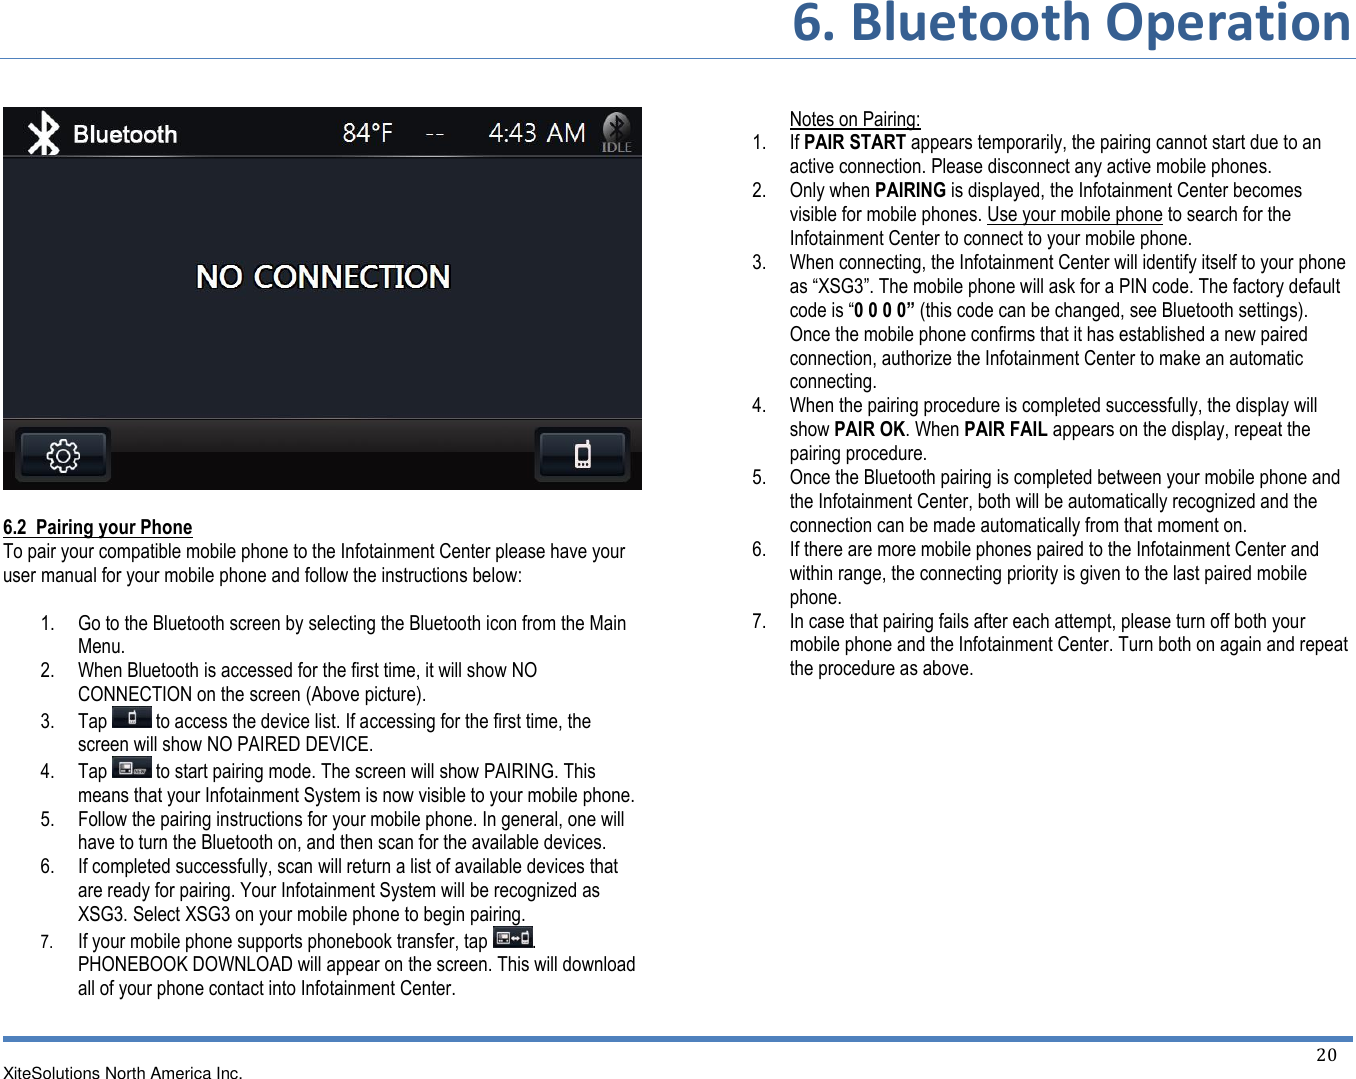 6. Bluetooth Operation XiteSolutions North America Inc.    20     6.2  Pairing your Phone To pair your compatible mobile phone to the Infotainment Center please have your user manual for your mobile phone and follow the instructions below:  1. Go to the Bluetooth screen by selecting the Bluetooth icon from the Main Menu. 2. When Bluetooth is accessed for the first time, it will show NO CONNECTION on the screen (Above picture). 3. Tap   to access the device list. If accessing for the first time, the screen will show NO PAIRED DEVICE. 4. Tap   to start pairing mode. The screen will show PAIRING. This means that your Infotainment System is now visible to your mobile phone. 5. Follow the pairing instructions for your mobile phone. In general, one will have to turn the Bluetooth on, and then scan for the available devices. 6. If completed successfully, scan will return a list of available devices that are ready for pairing. Your Infotainment System will be recognized as XSG3. Select XSG3 on your mobile phone to begin pairing. 7. If your mobile phone supports phonebook transfer, tap  . PHONEBOOK DOWNLOAD will appear on the screen. This will download all of your phone contact into Infotainment Center.    Notes on Pairing: 1. If PAIR START appears temporarily, the pairing cannot start due to an active connection. Please disconnect any active mobile phones. 2. Only when PAIRING is displayed, the Infotainment Center becomes visible for mobile phones. Use your mobile phone to search for the Infotainment Center to connect to your mobile phone. 3. When connecting, the Infotainment Center will identify itself to your phone as “XSG3”. The mobile phone will ask for a PIN code. The factory default code is “0 0 0 0” (this code can be changed, see Bluetooth settings). Once the mobile phone confirms that it has established a new paired connection, authorize the Infotainment Center to make an automatic connecting. 4. When the pairing procedure is completed successfully, the display will show PAIR OK. When PAIR FAIL appears on the display, repeat the pairing procedure. 5. Once the Bluetooth pairing is completed between your mobile phone and the Infotainment Center, both will be automatically recognized and the connection can be made automatically from that moment on. 6. If there are more mobile phones paired to the Infotainment Center and within range, the connecting priority is given to the last paired mobile phone. 7. In case that pairing fails after each attempt, please turn off both your mobile phone and the Infotainment Center. Turn both on again and repeat the procedure as above.             